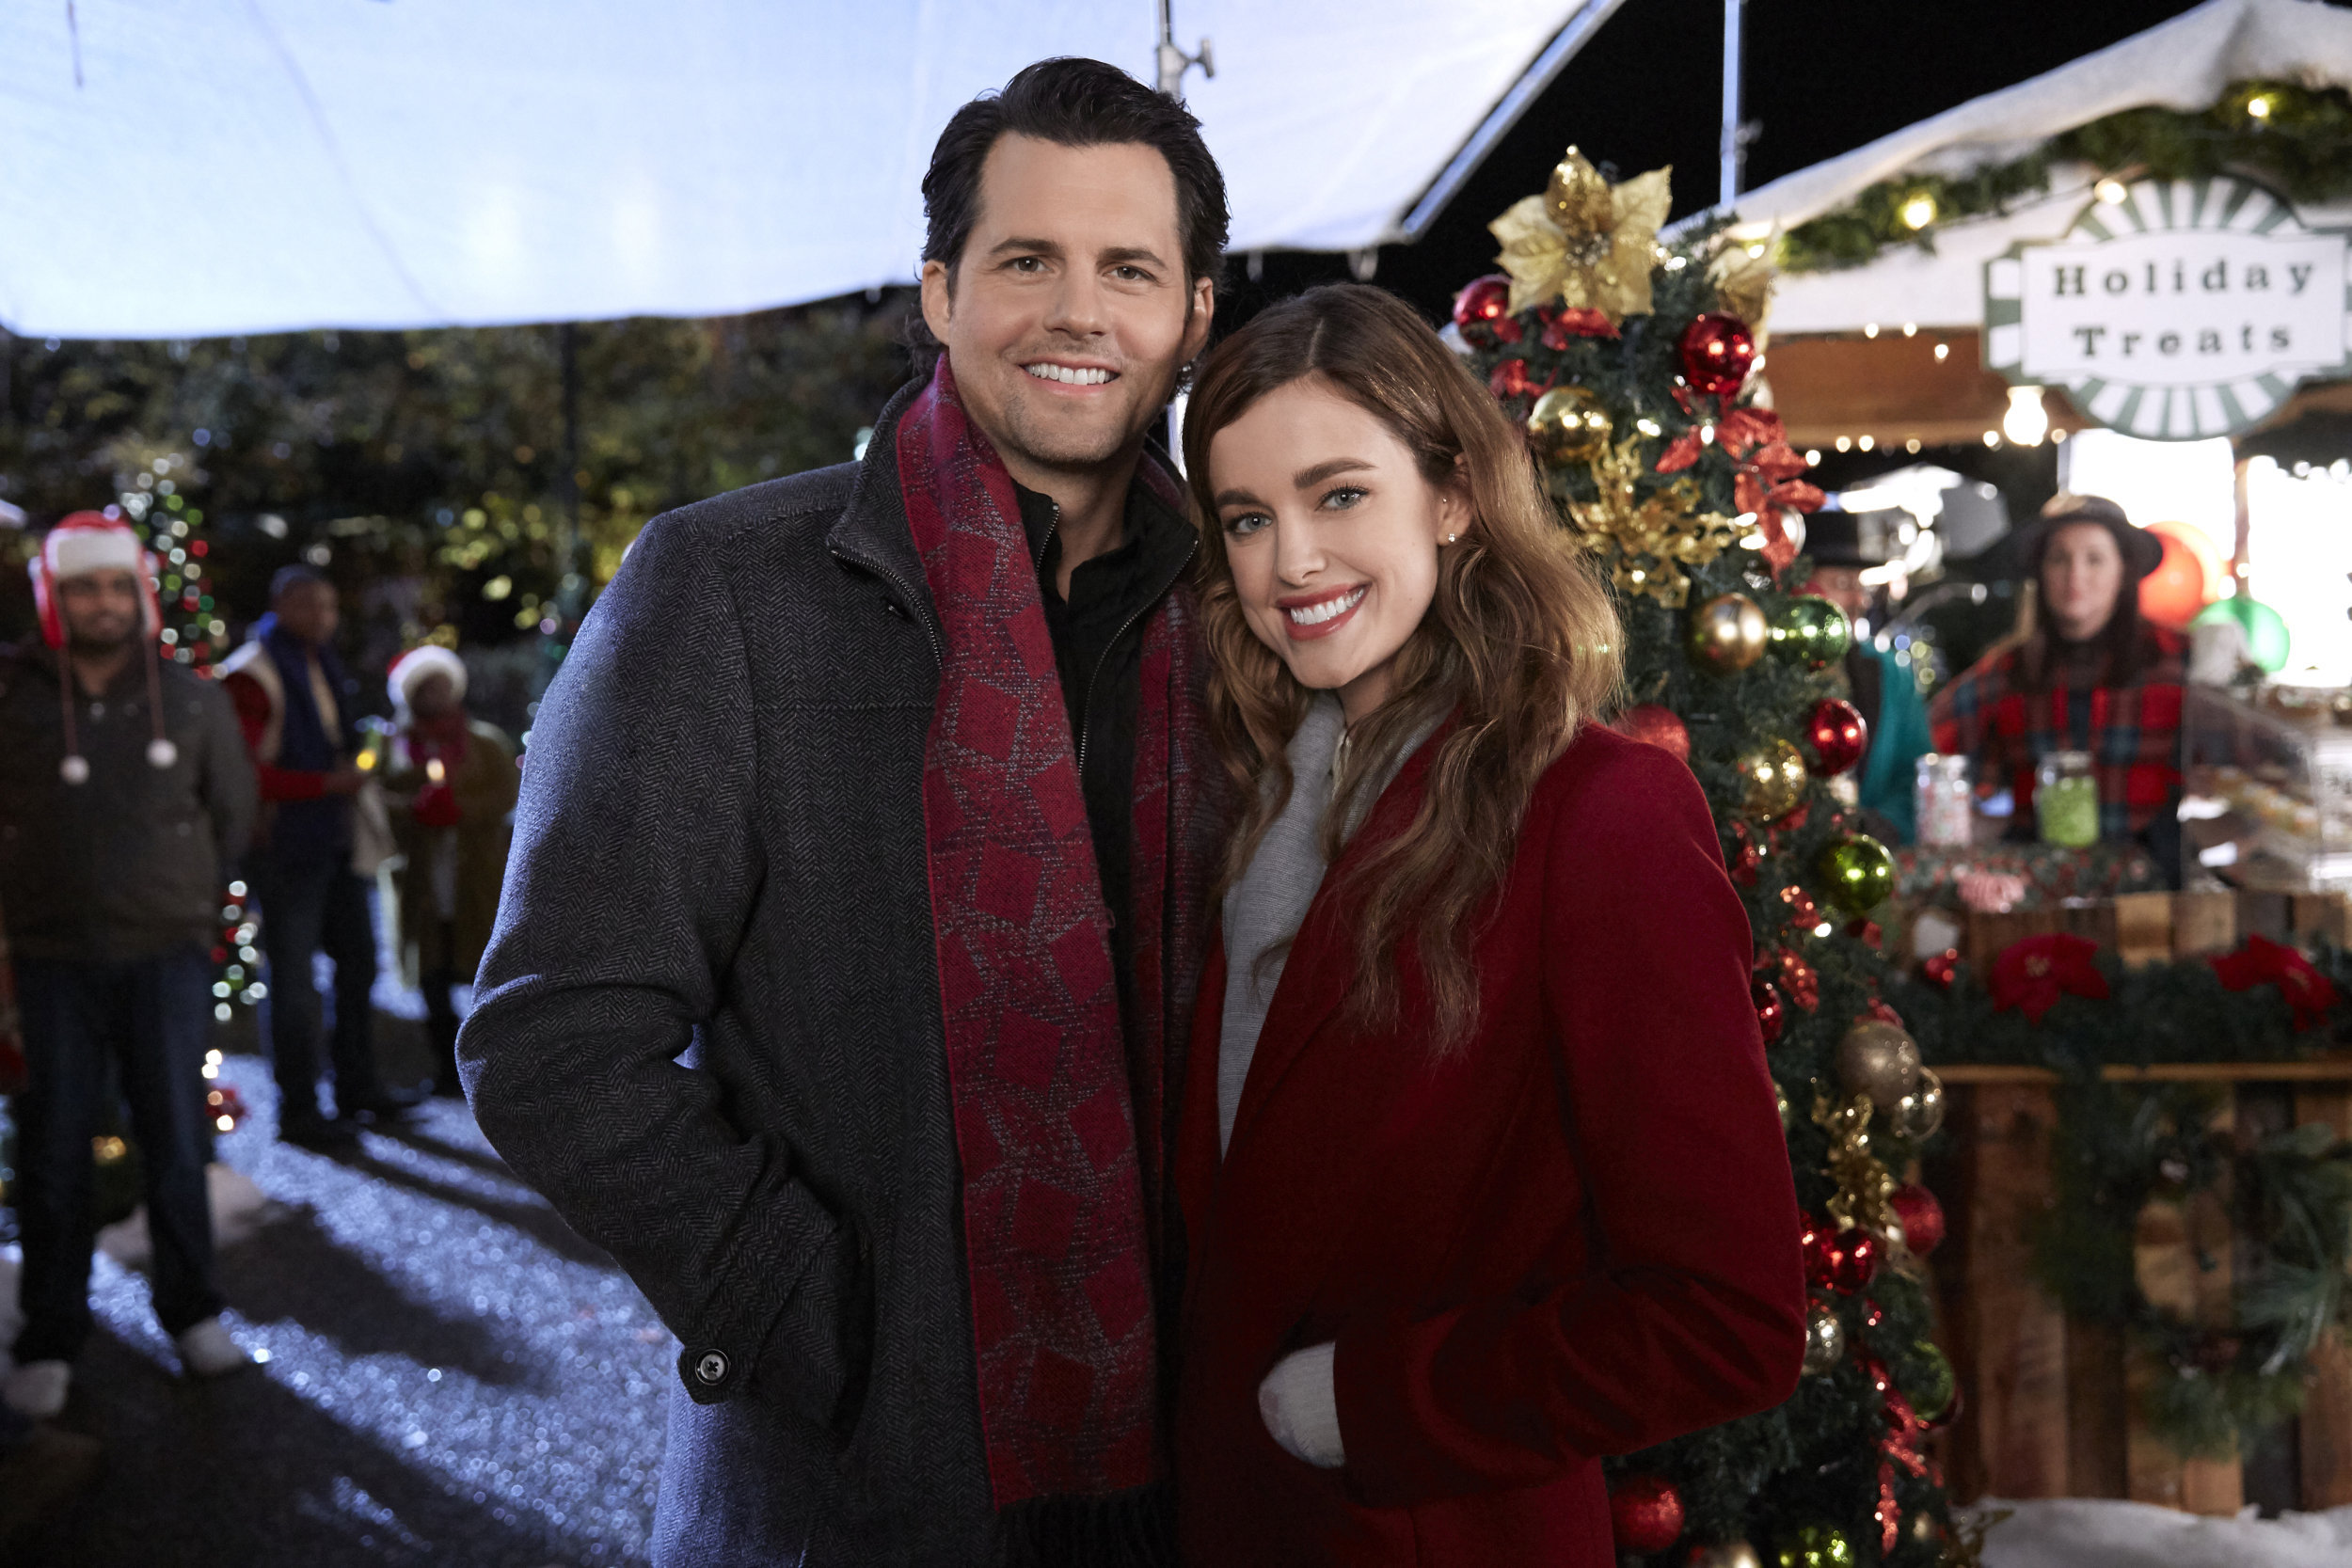 The two smiling main characters stand close together while at an outdoor Christmas market.